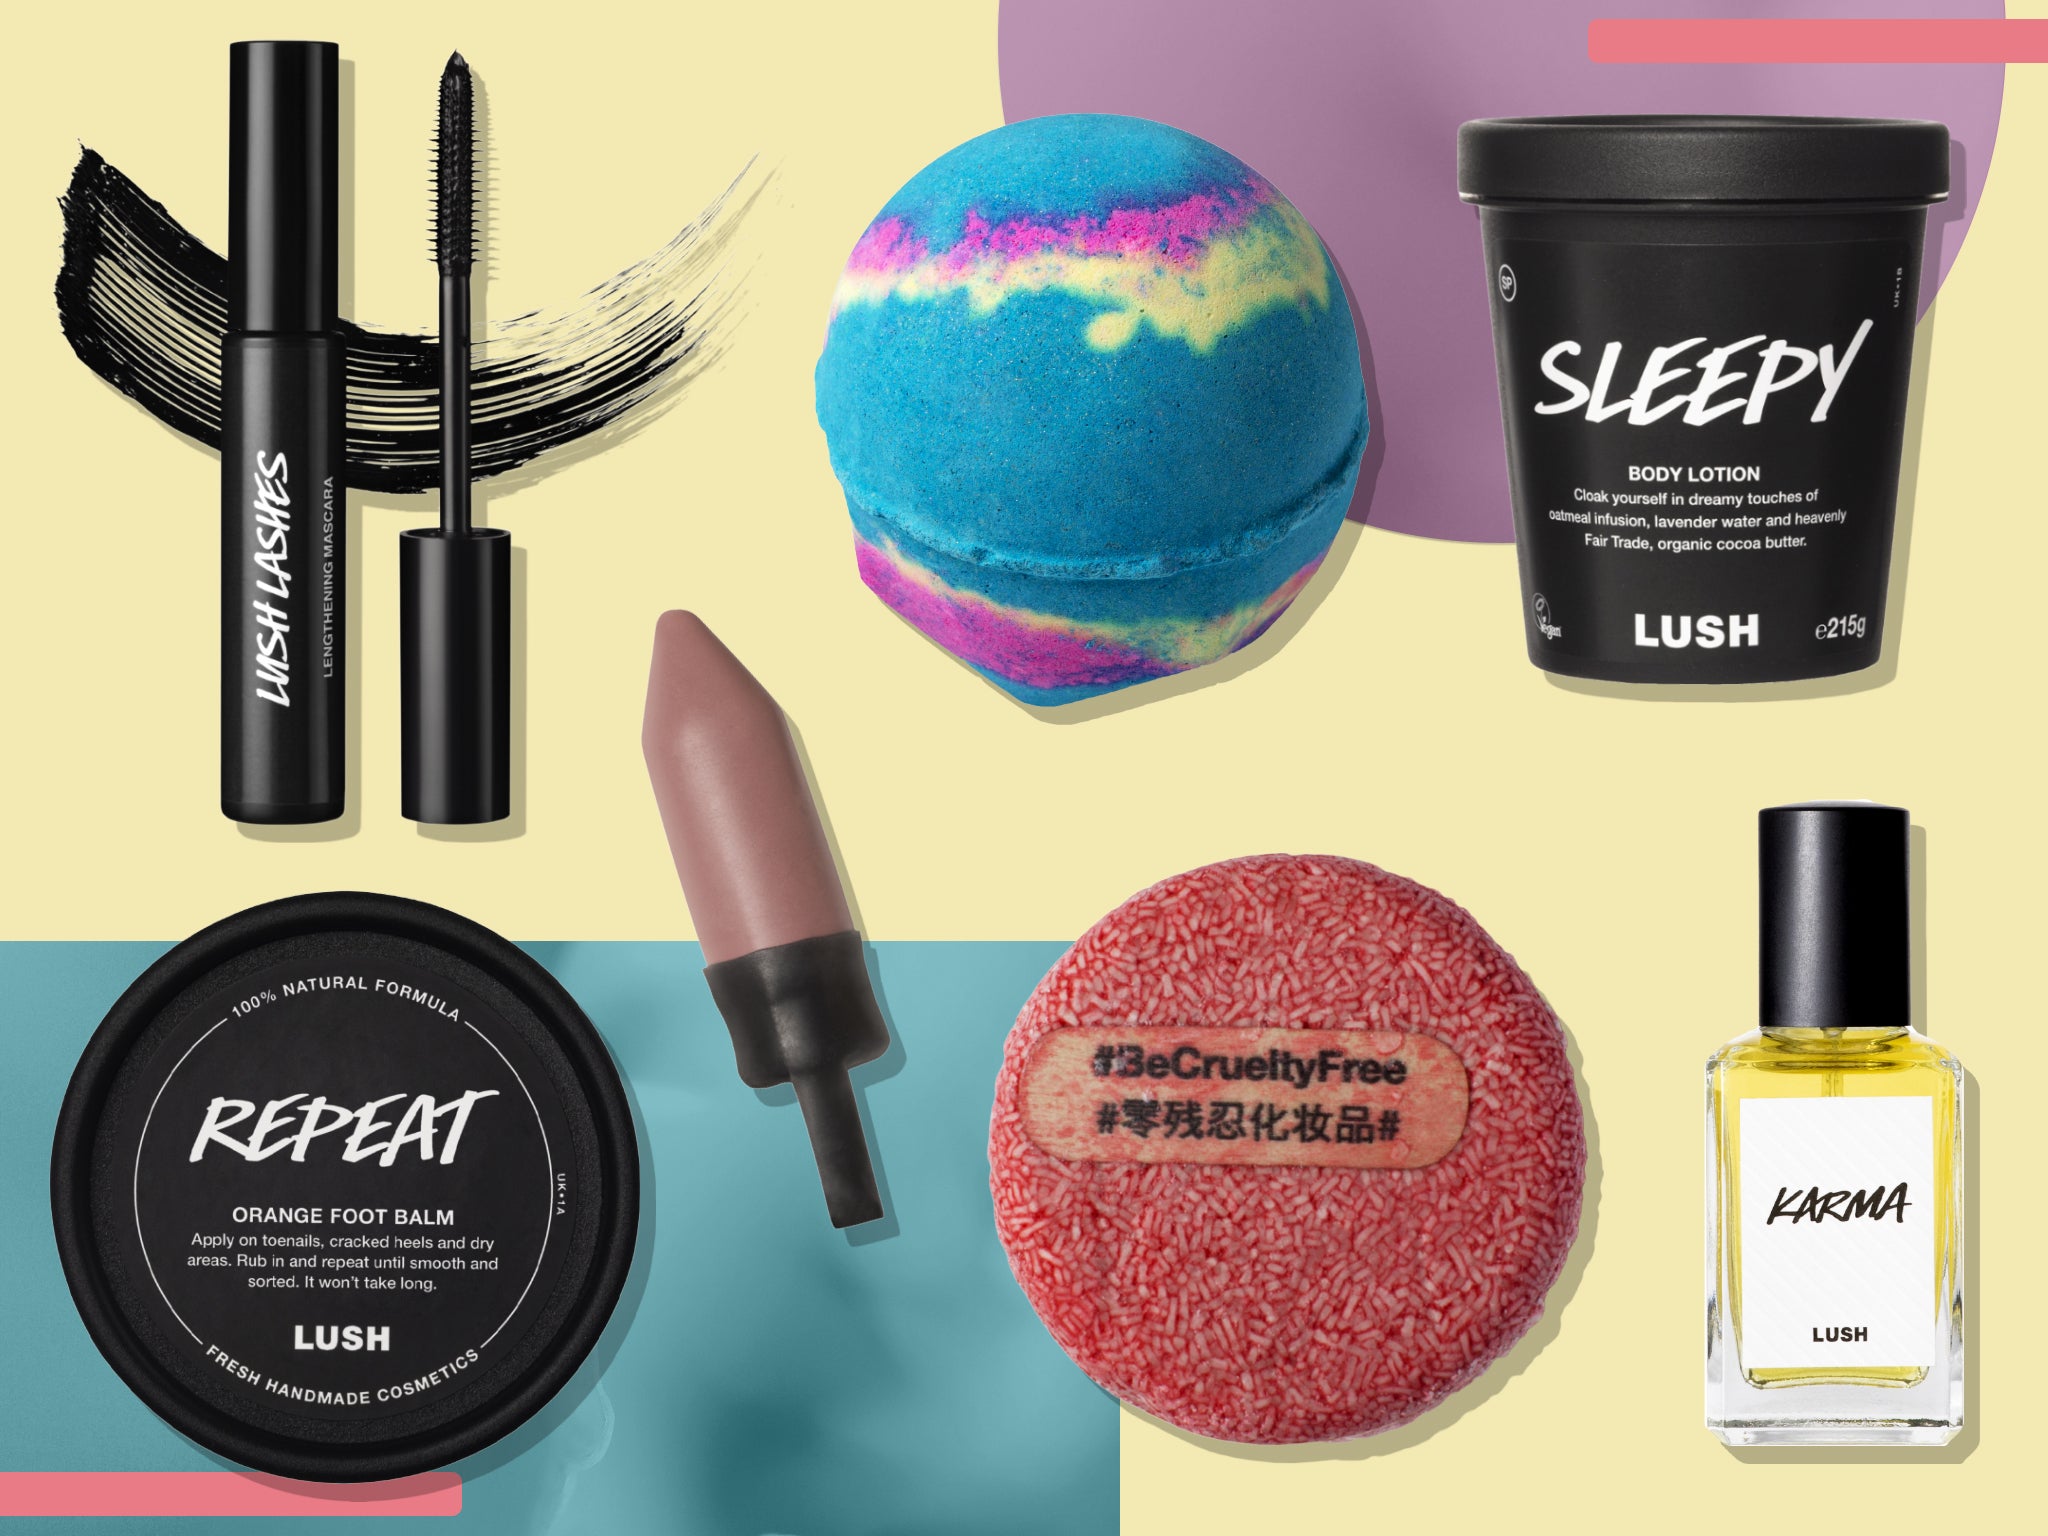 Best Body Make-Up Products 2021